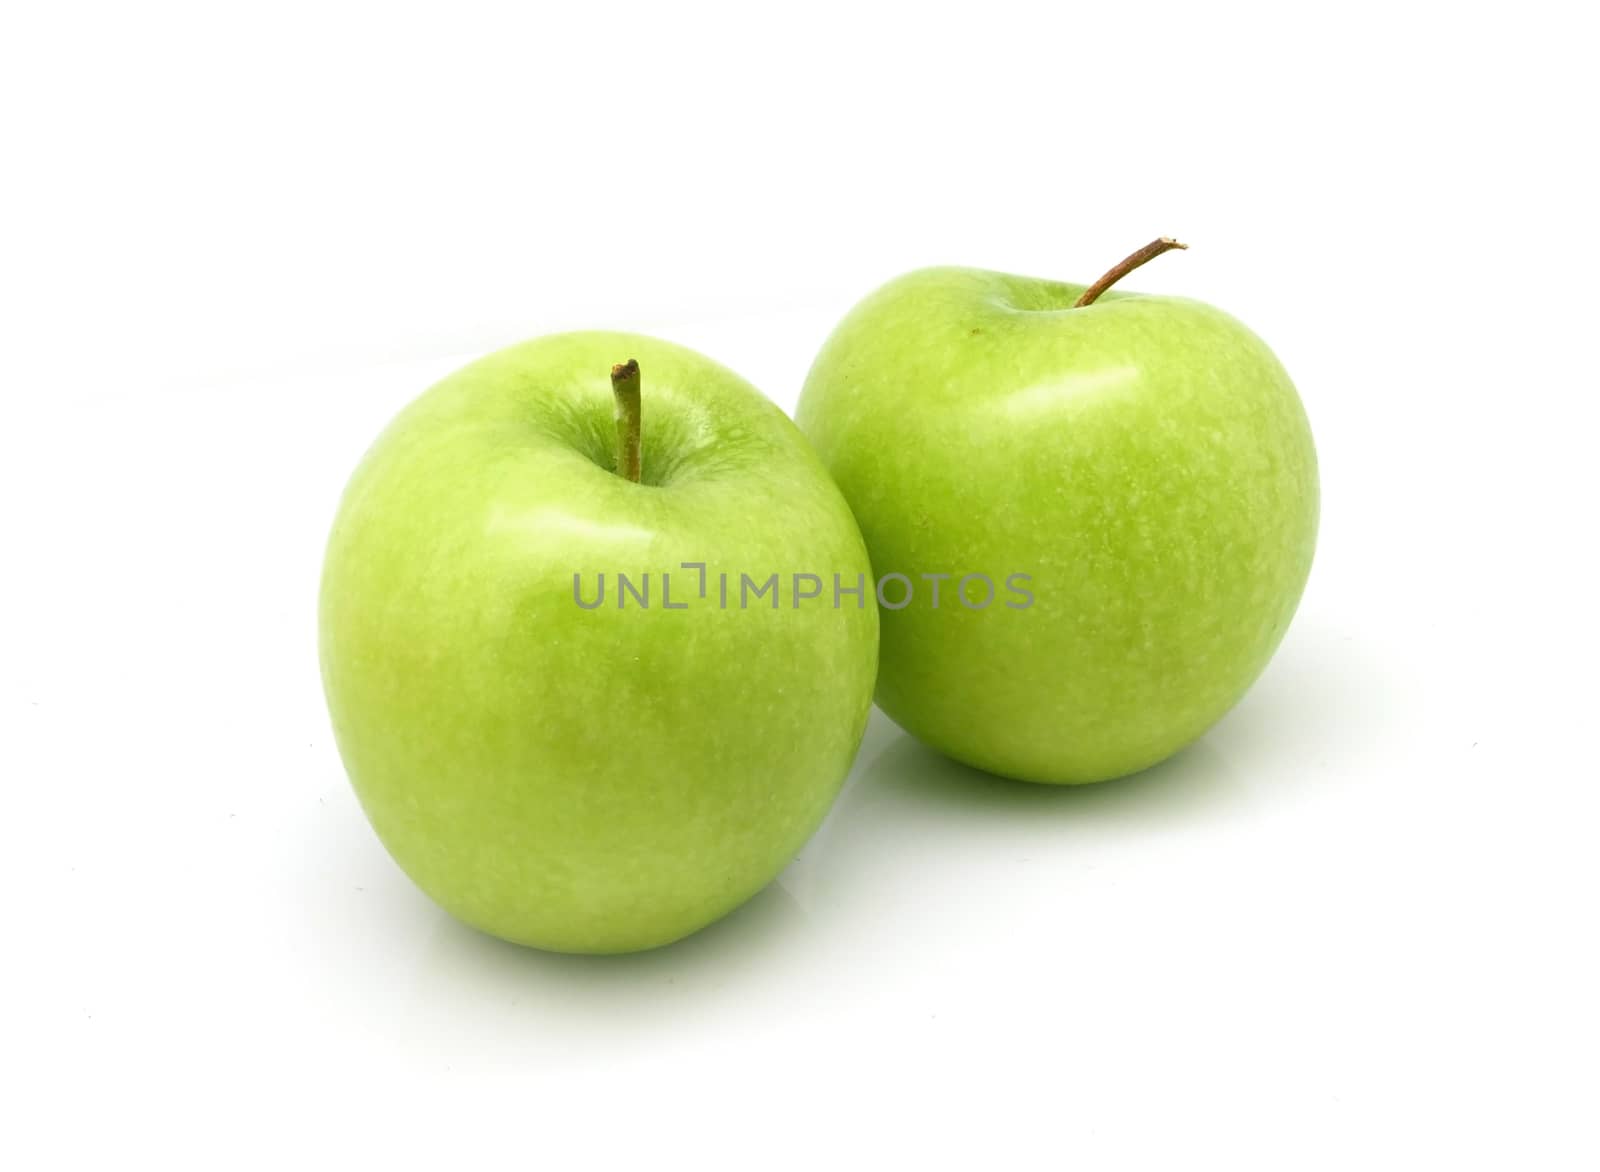 Two green apples on white background